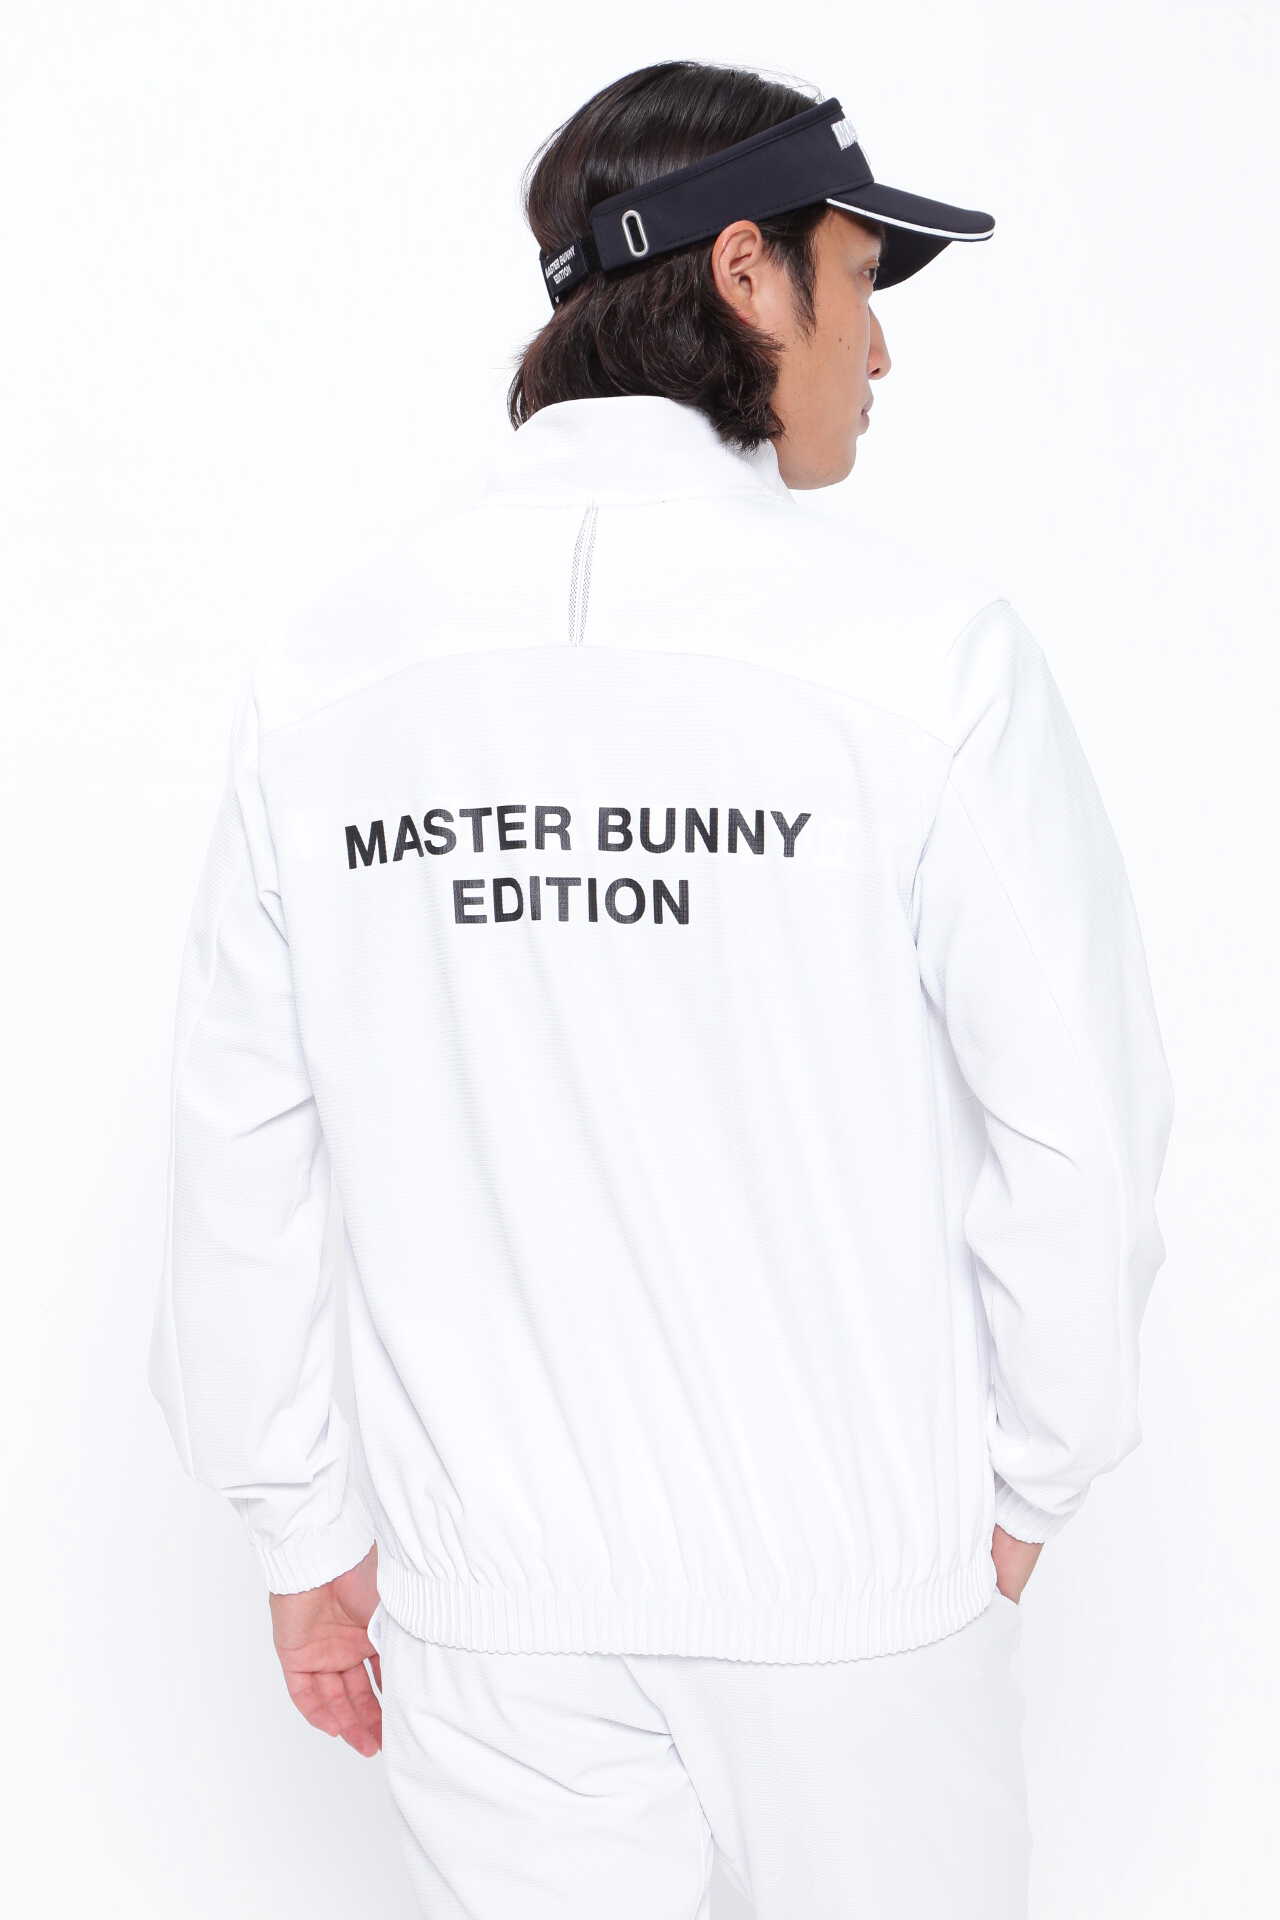 MASTER BUNNY EDITION  size 0